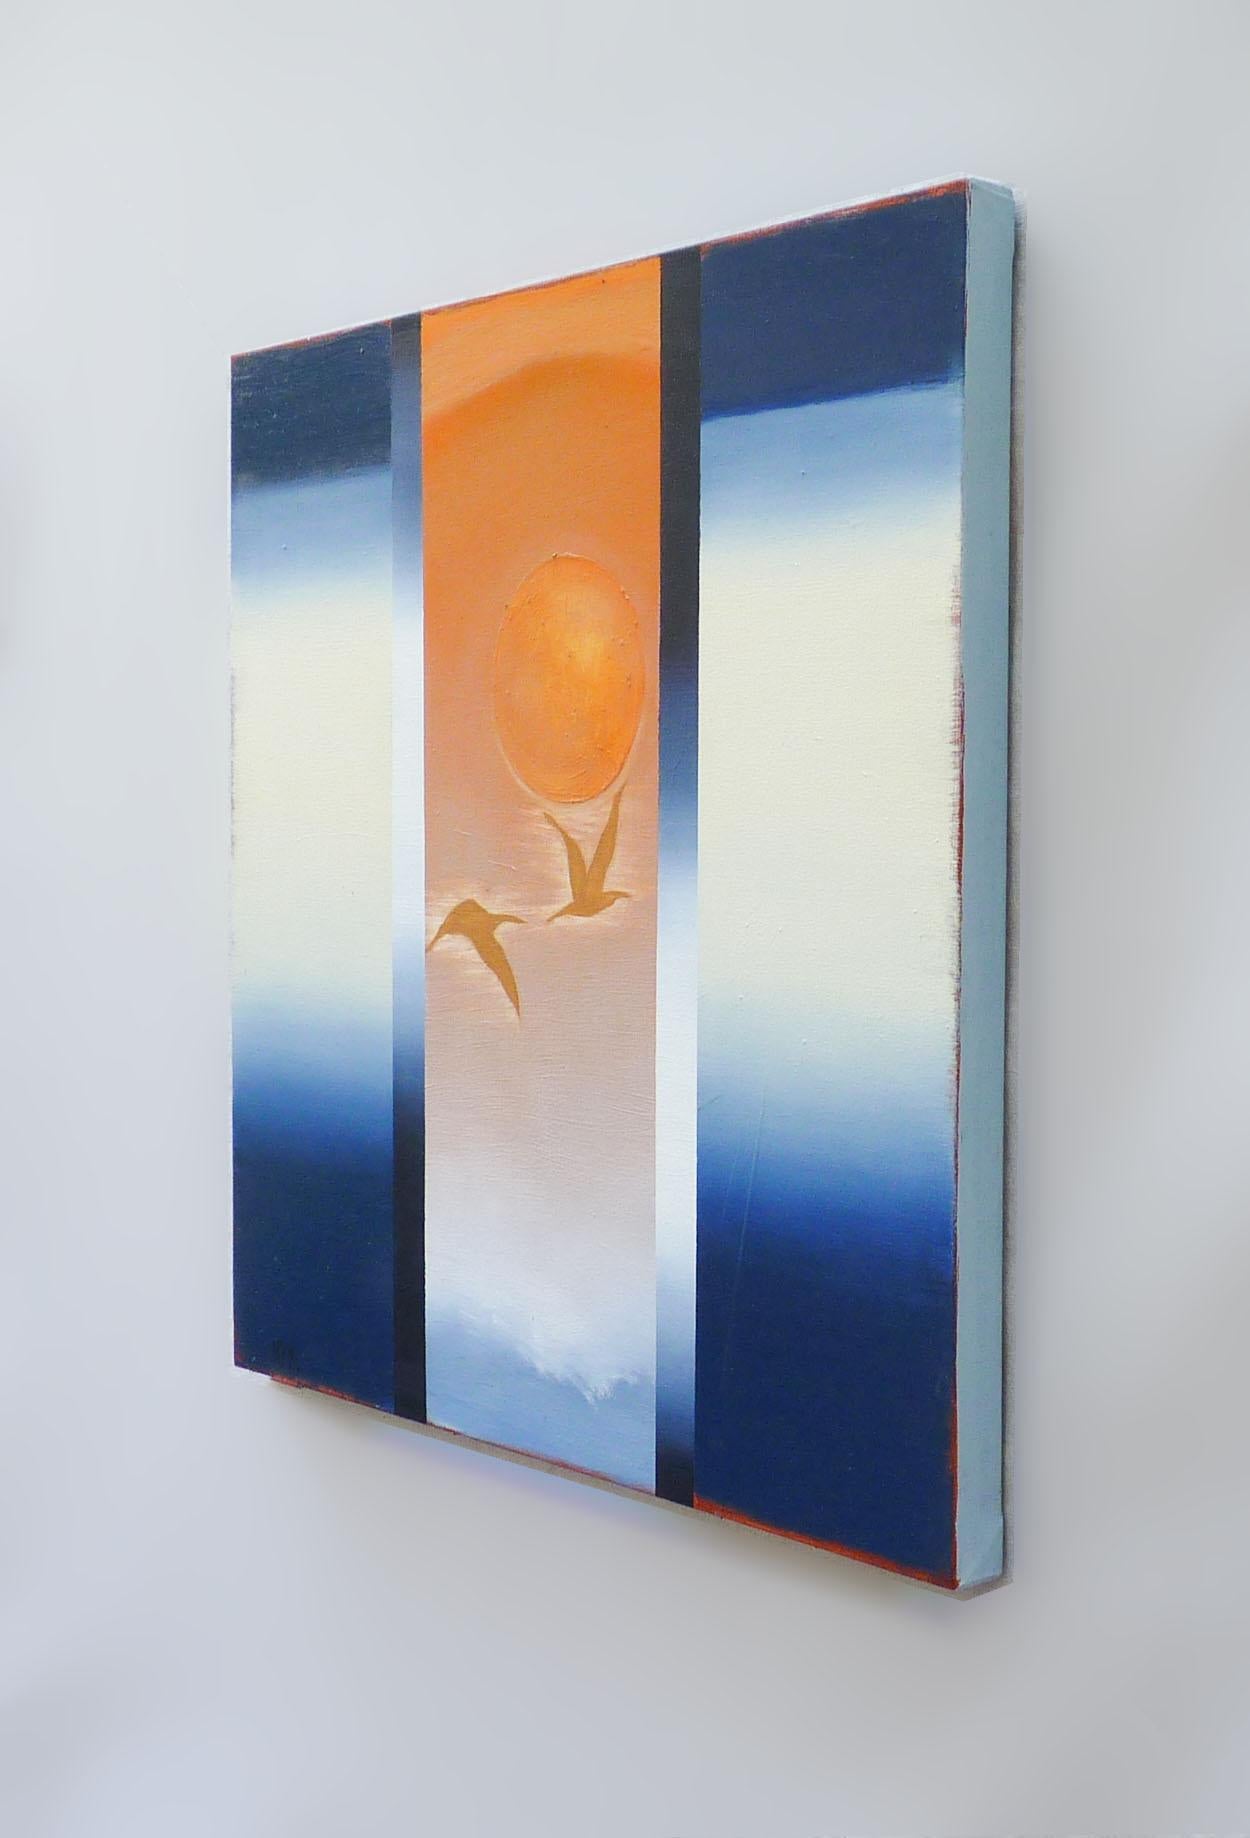 <p>Artist Comments<br>An image of two birds flying against the background of the sun develops in artist Heidi Hybl's modernist piece. She shares an engaging interpretation of Japanese influences, to which she looks for inspiration. 